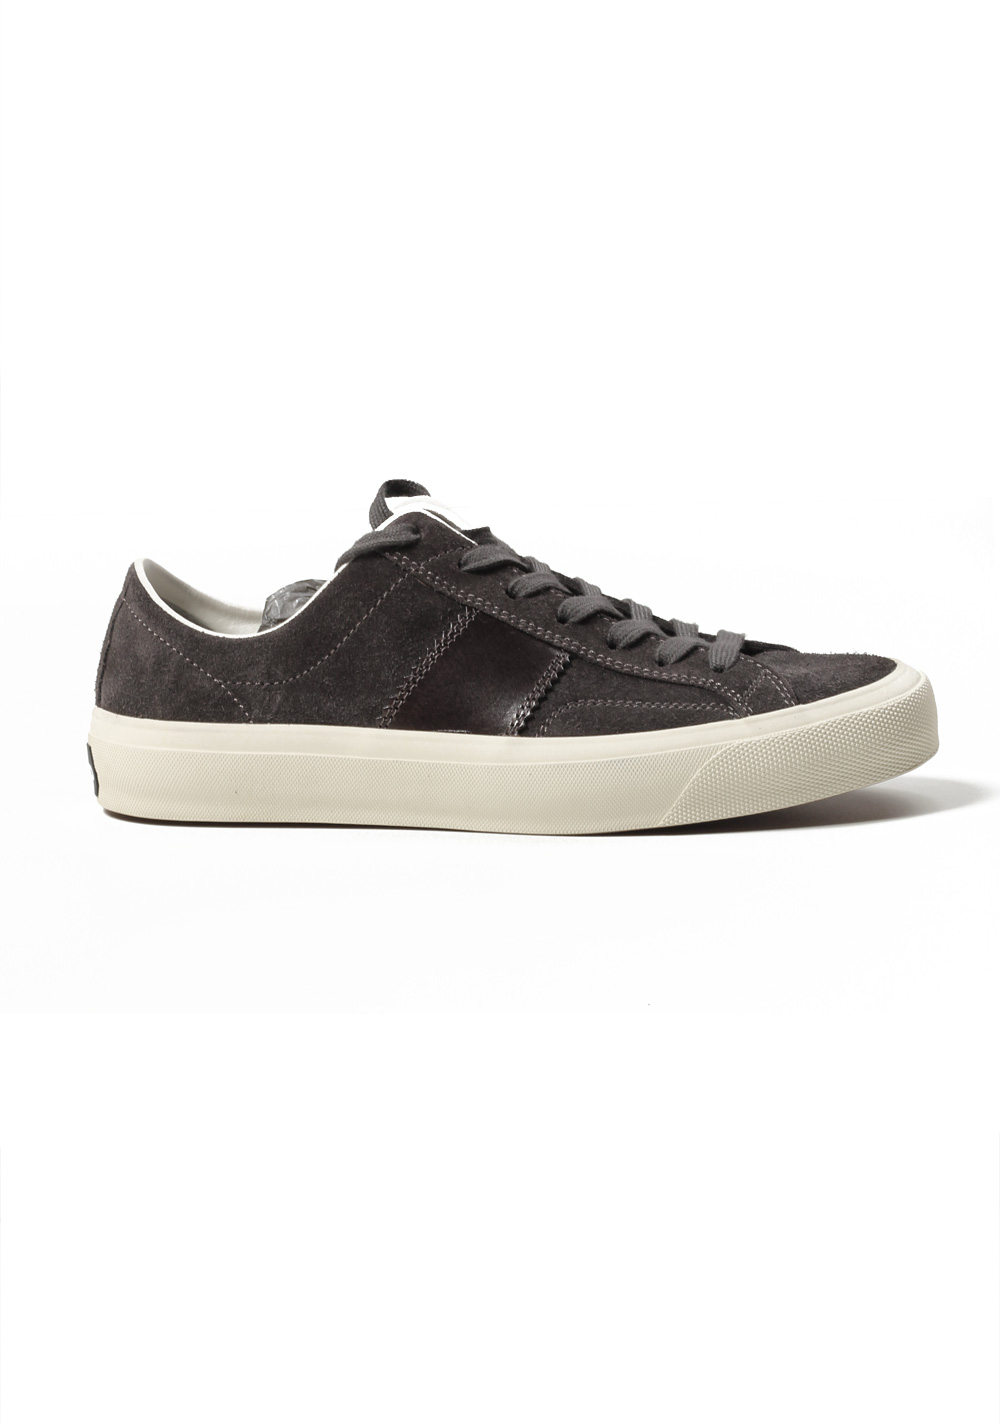 TOM FORD Cambridge Lace Up Dark Gray Suede Sneaker Shoes Size 9,5 UK / 10,5 U.S. | Costume Limité